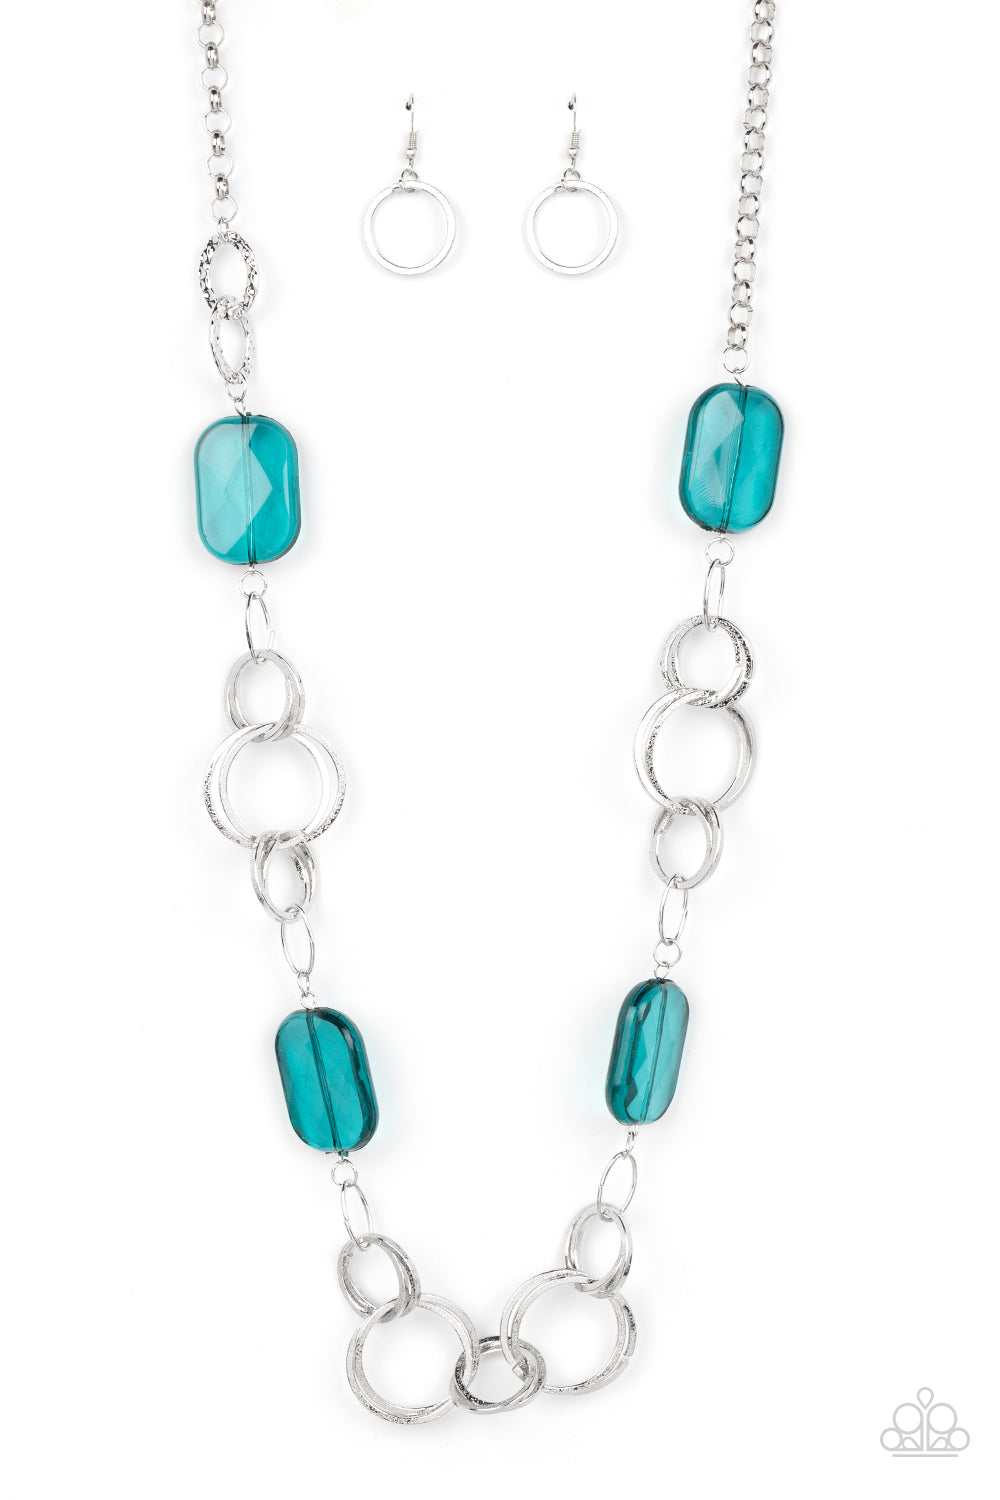 Stained Glass Glamour Paparazzi Accessories Necklace with Earrings - Blue